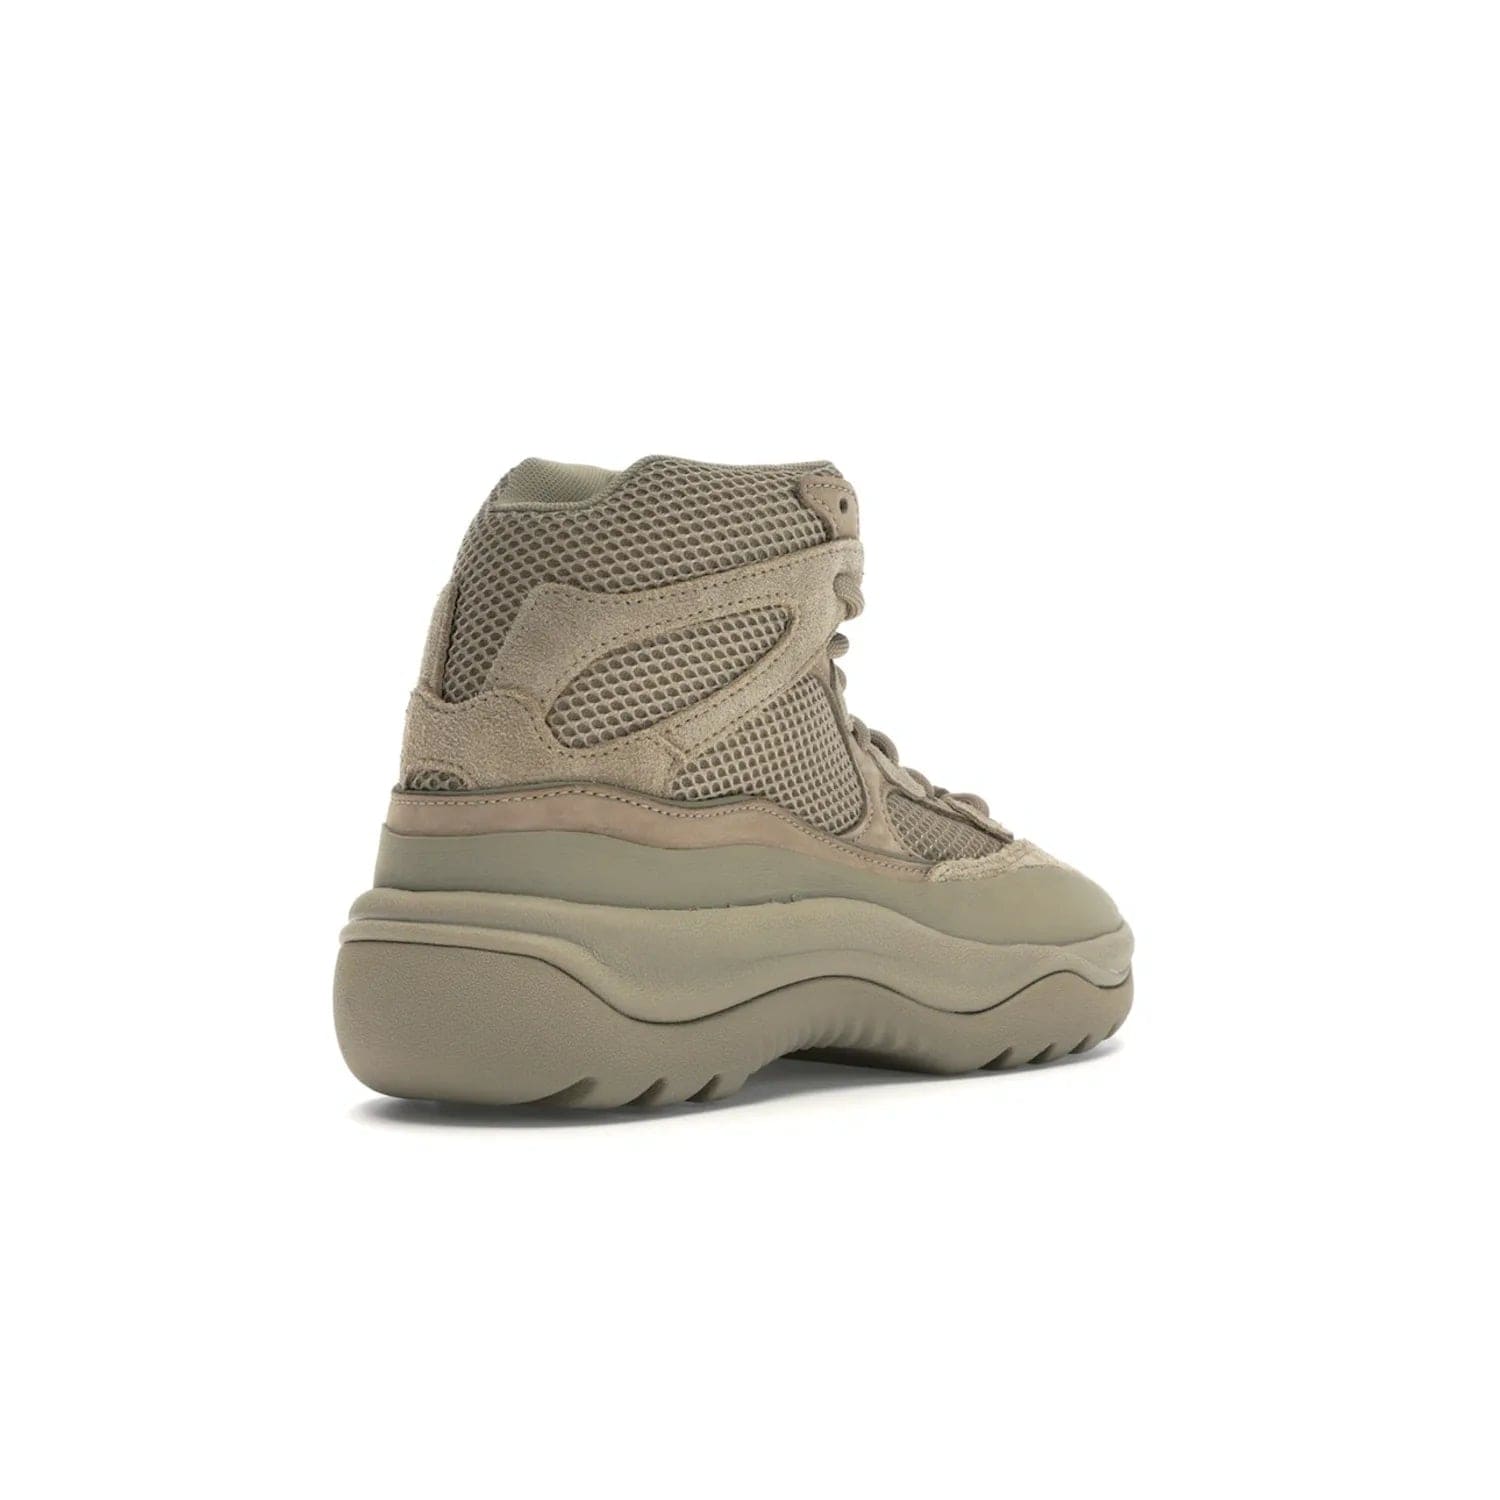 adidas Yeezy Desert Boot Rock - Image 32 - Only at www.BallersClubKickz.com - #
This season, make a fashion statement with the adidas Yeezy Desert Boot Rock. Nubuck and suede upper offers tonal style while the grooved sole provides traction and stability. Get yours in April 2019.